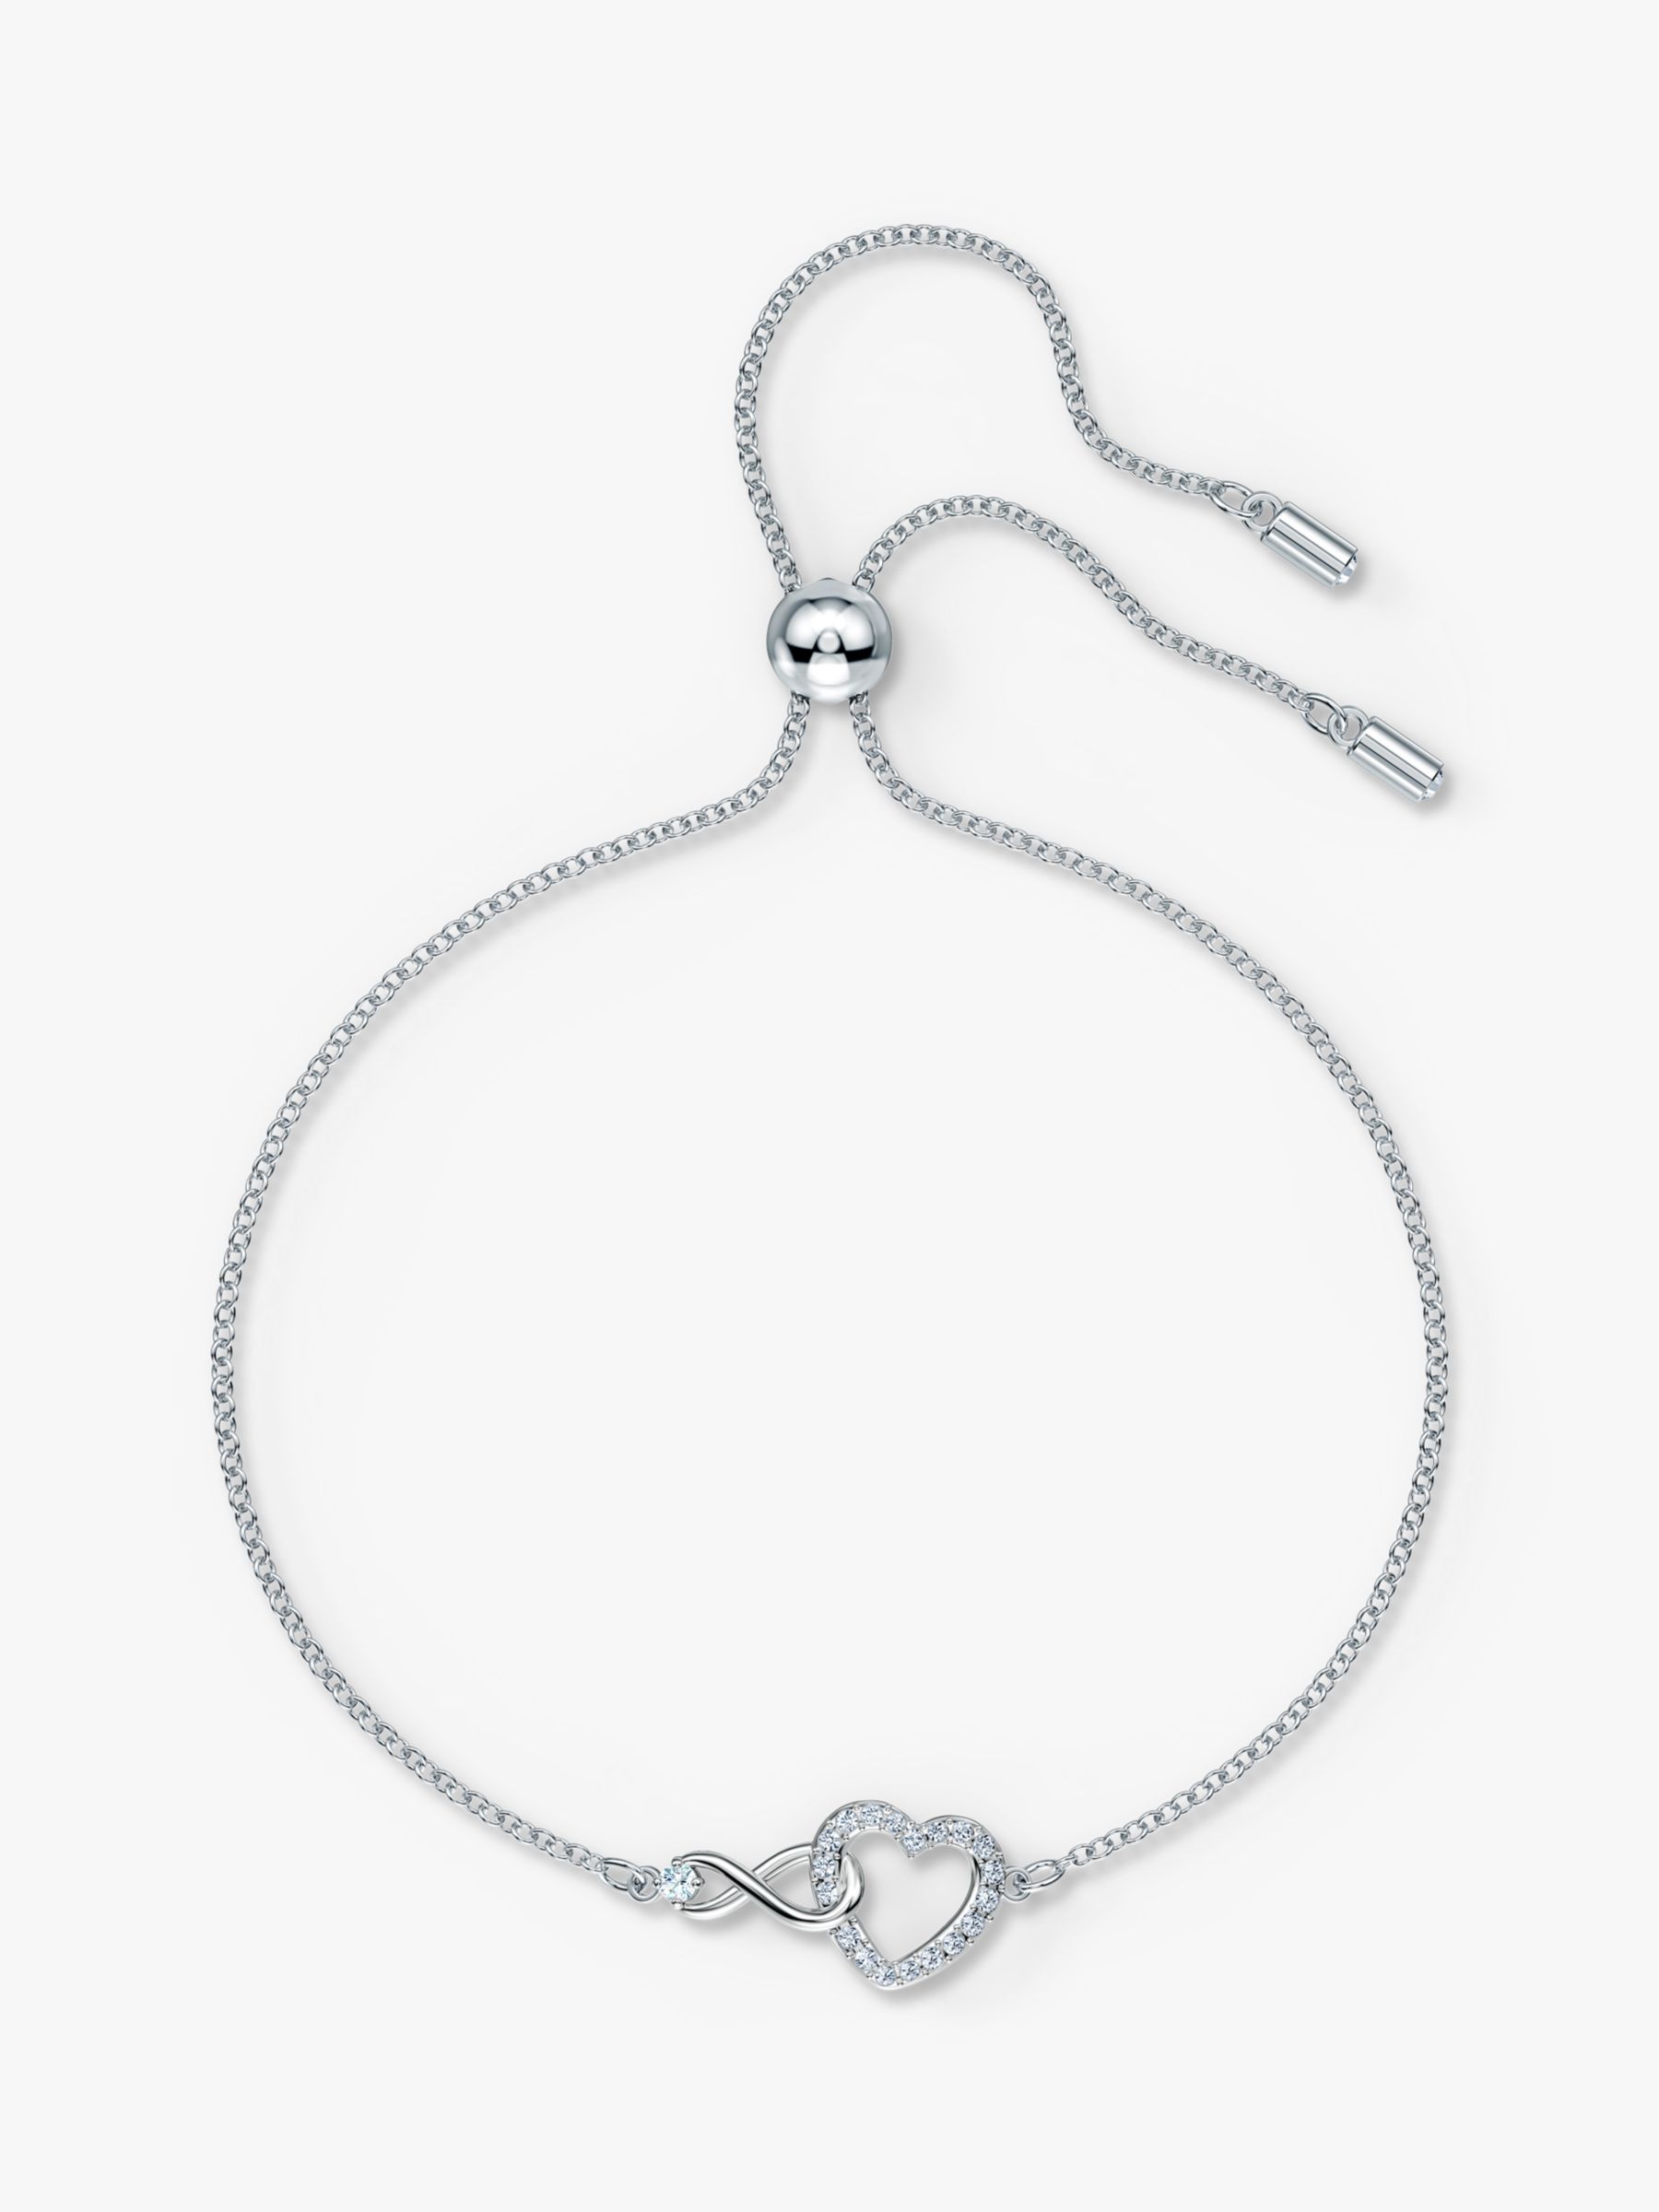 Buy Swarovski Crystal Infinity and Heart Chain Bracelet, Silver Online at johnlewis.com